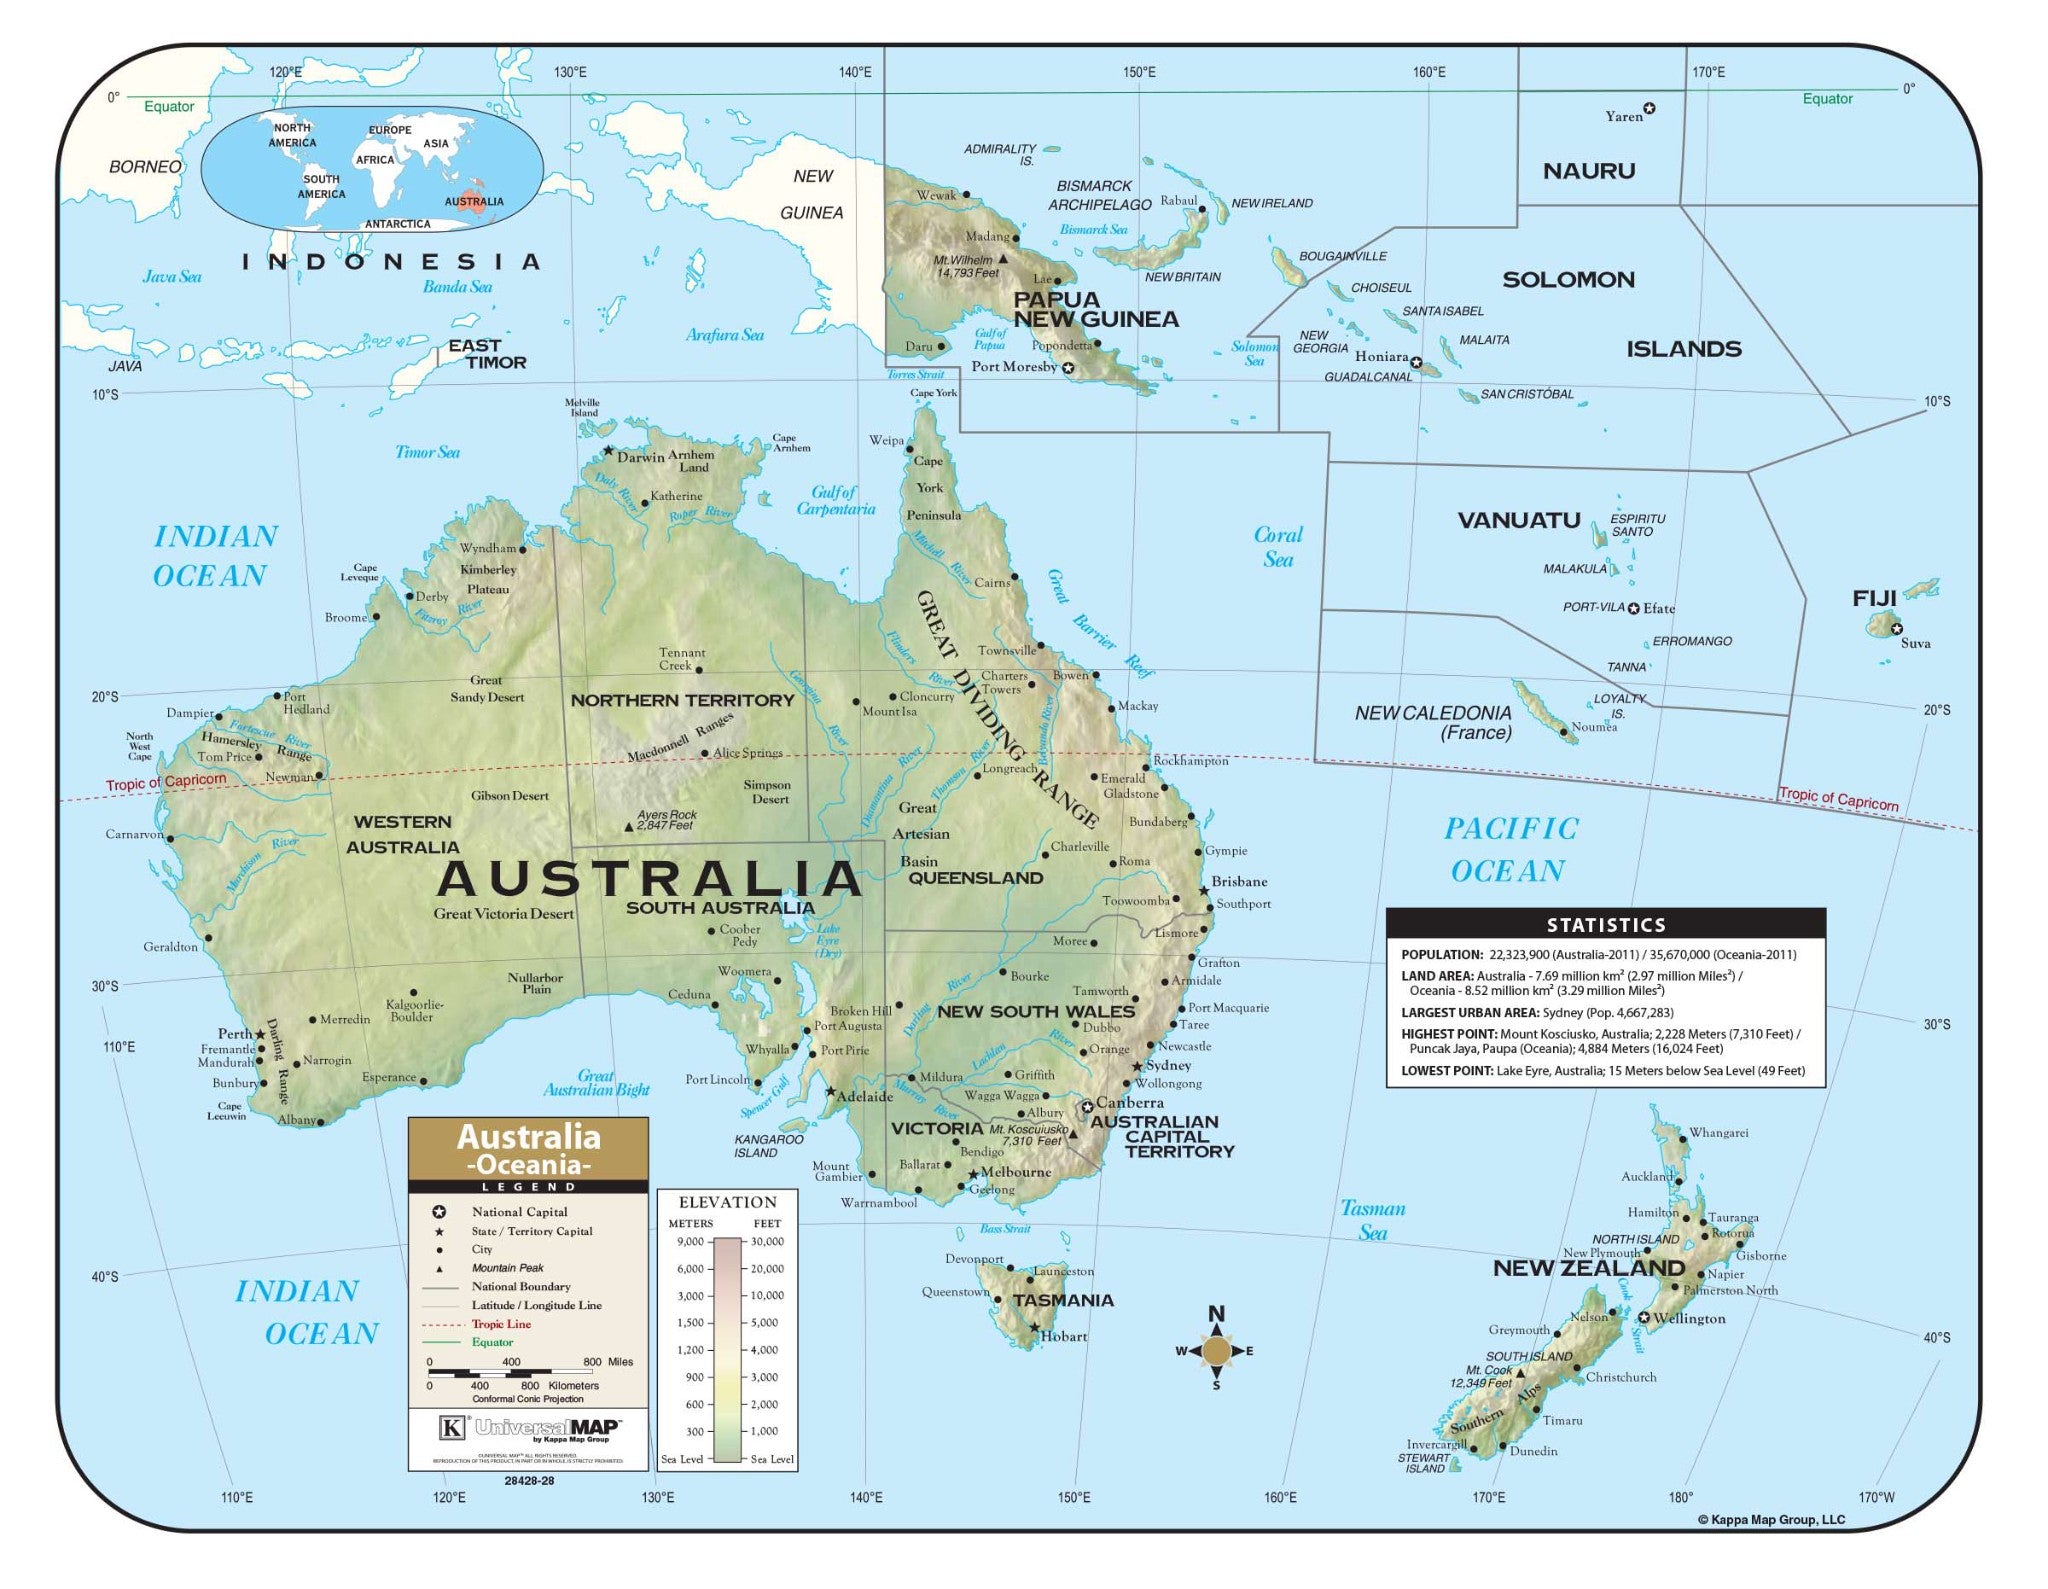 Kappa Map Group  Australia Oceania Large Scale Shaded Relief Wall Map